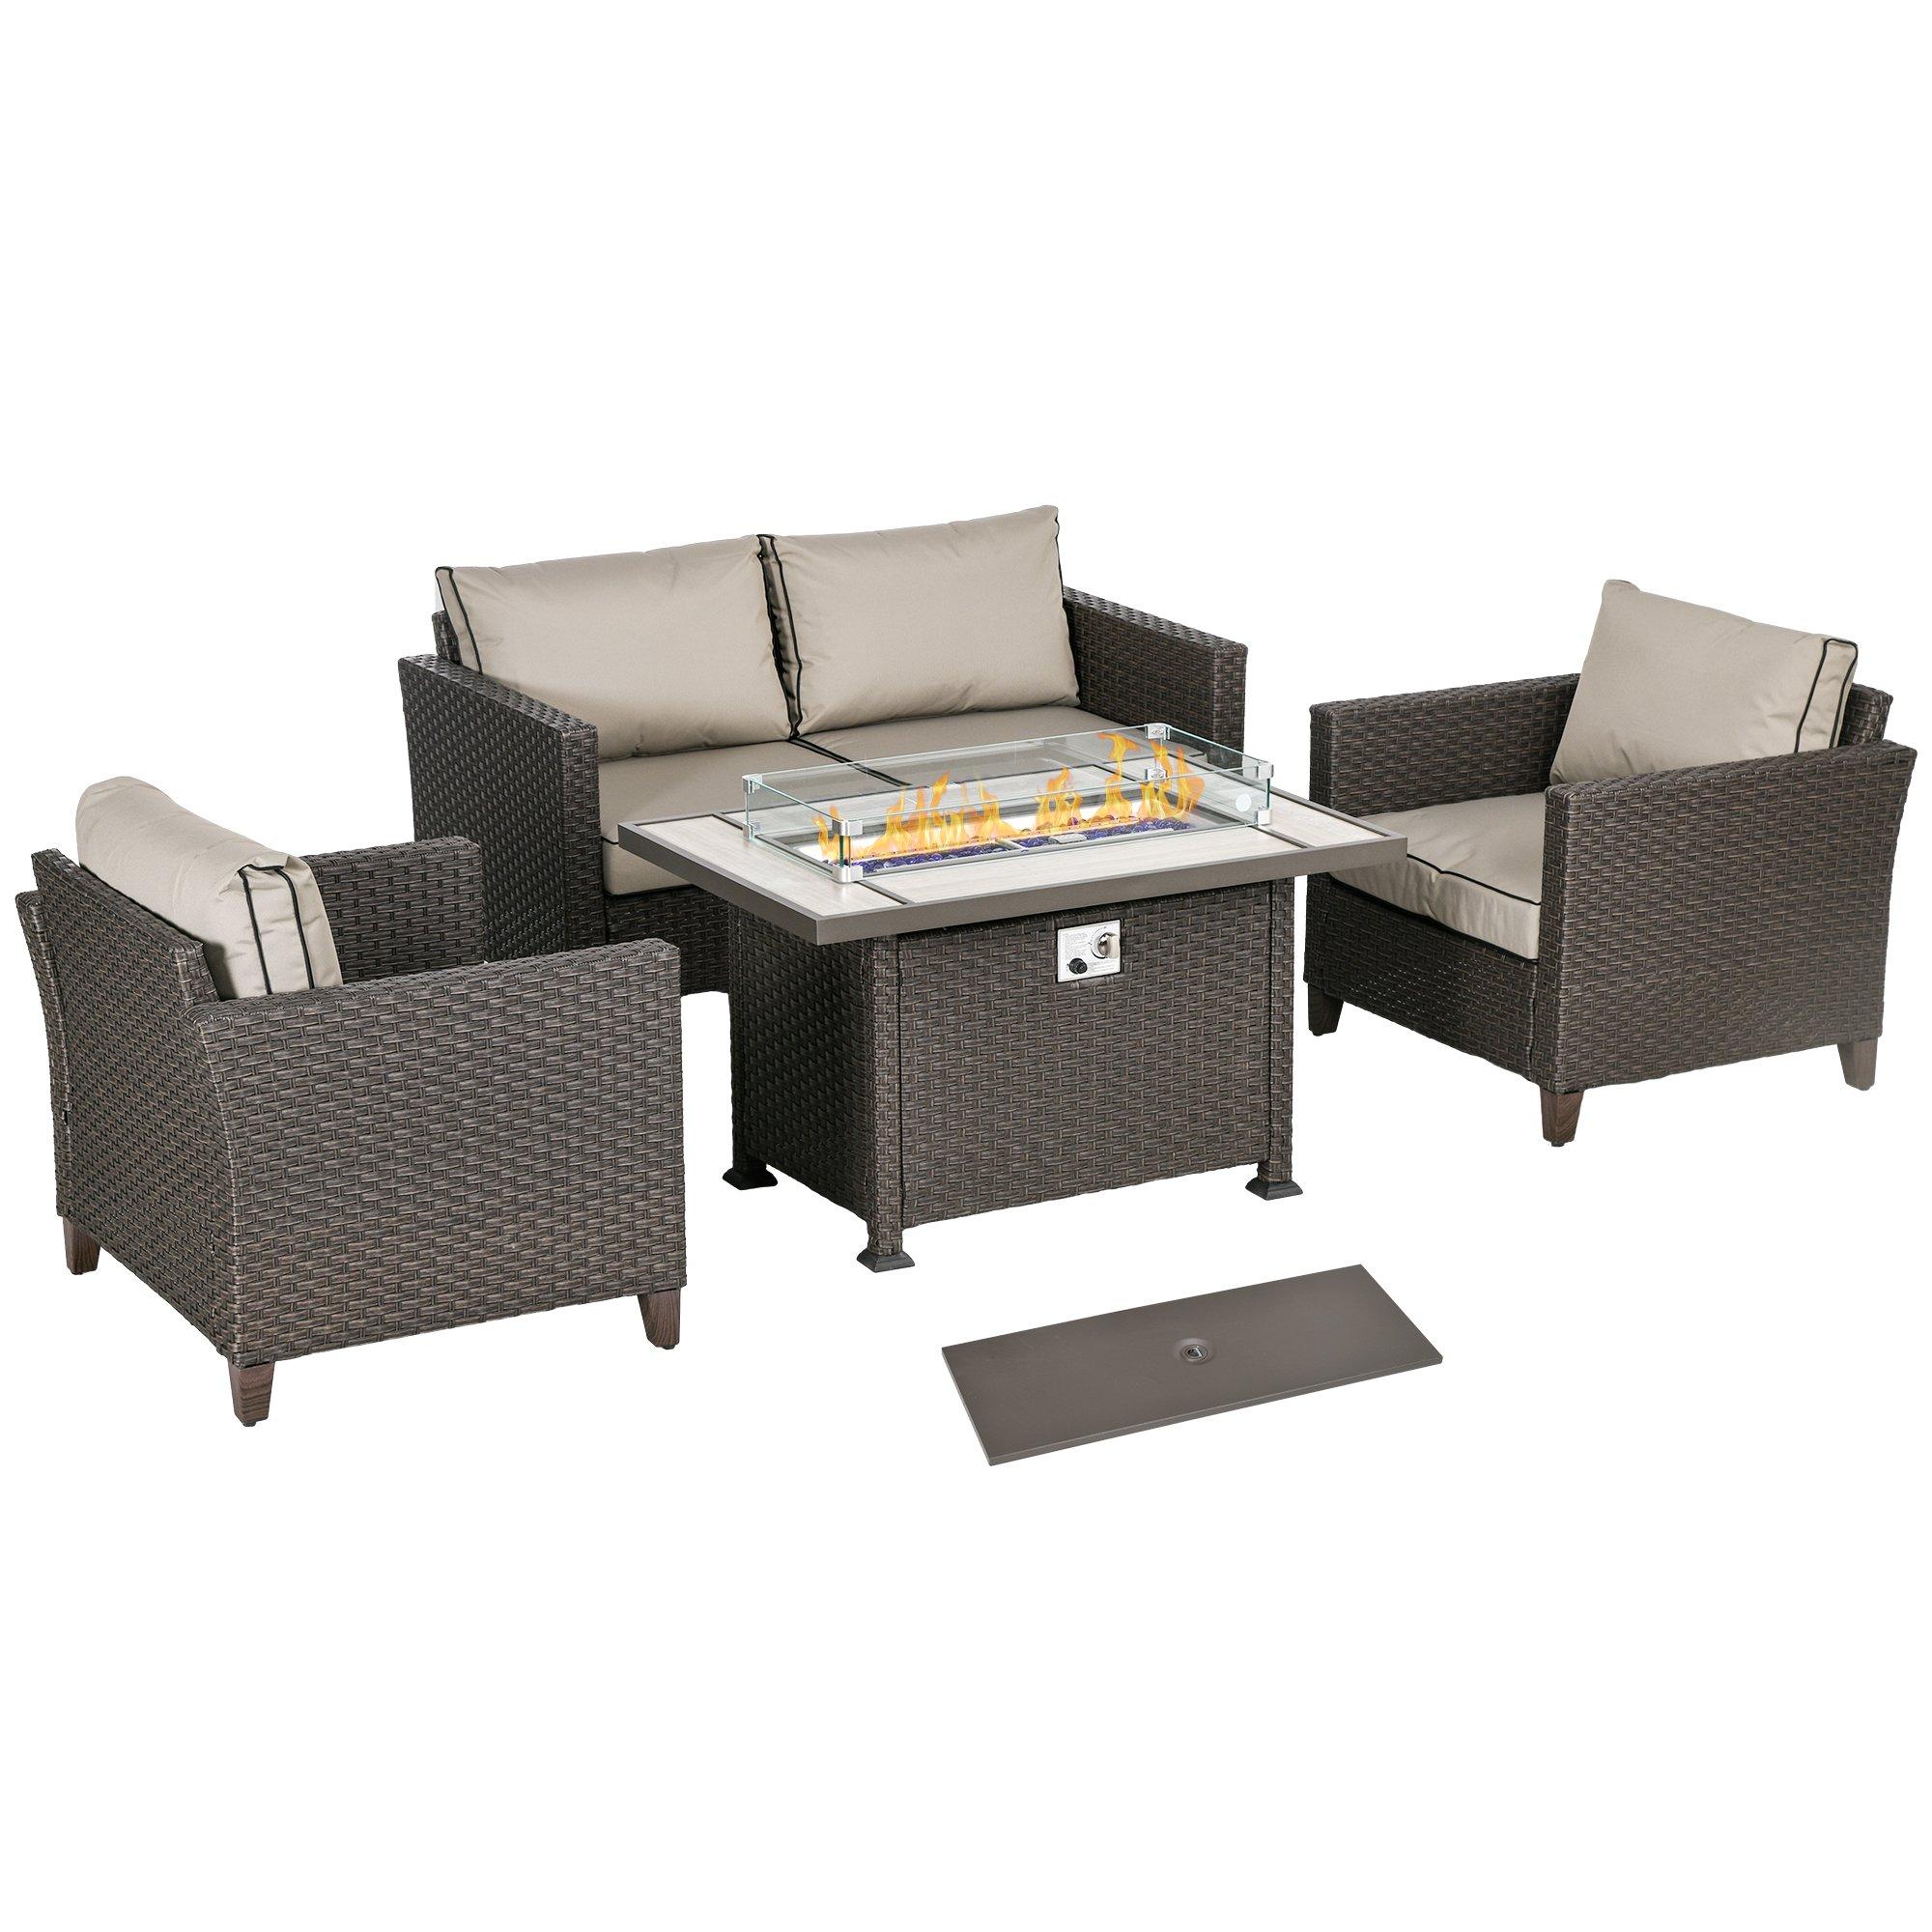 5 Pieces Rattan Garden Furniture Set with Gas Fire Pit Table, Cushion, Brown